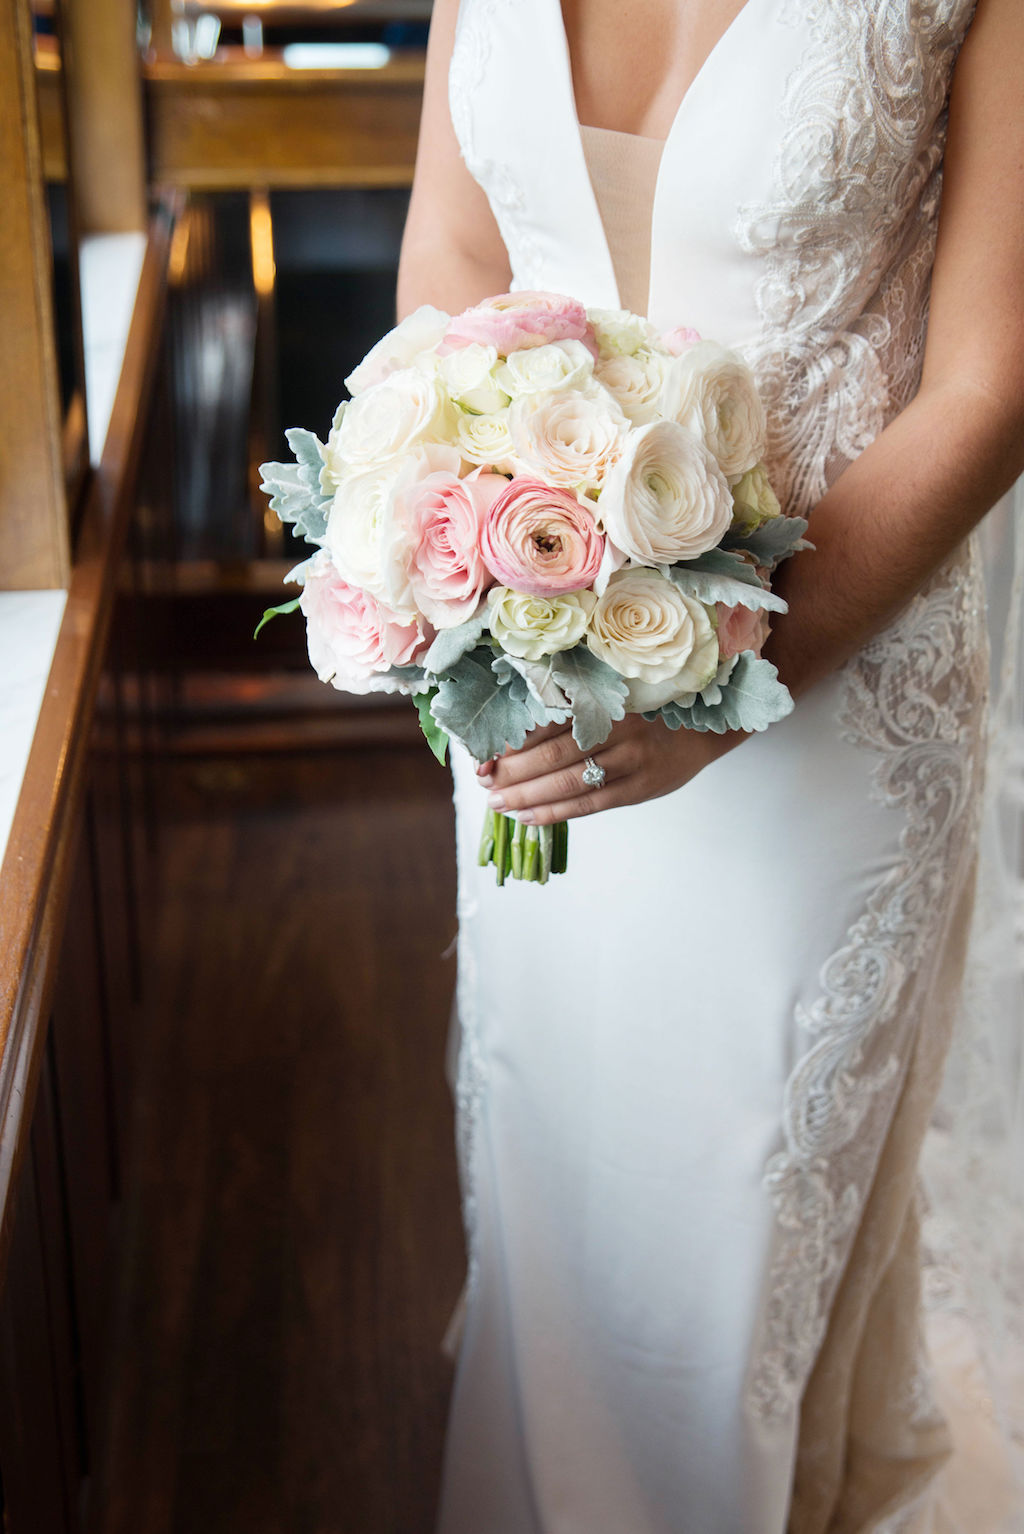 Bride Wedding Portrait in Deep V Neck Illusion Fitted Lace Tank Top Strap Wedding Dress with Blush Pink, Ivory and Dusty Miller Leaves Floral Bouquet | Tampa Bay Wedding Photographer Kristen Marie Photography | Wedding Dress Nikki's Glitz and Glam Boutique